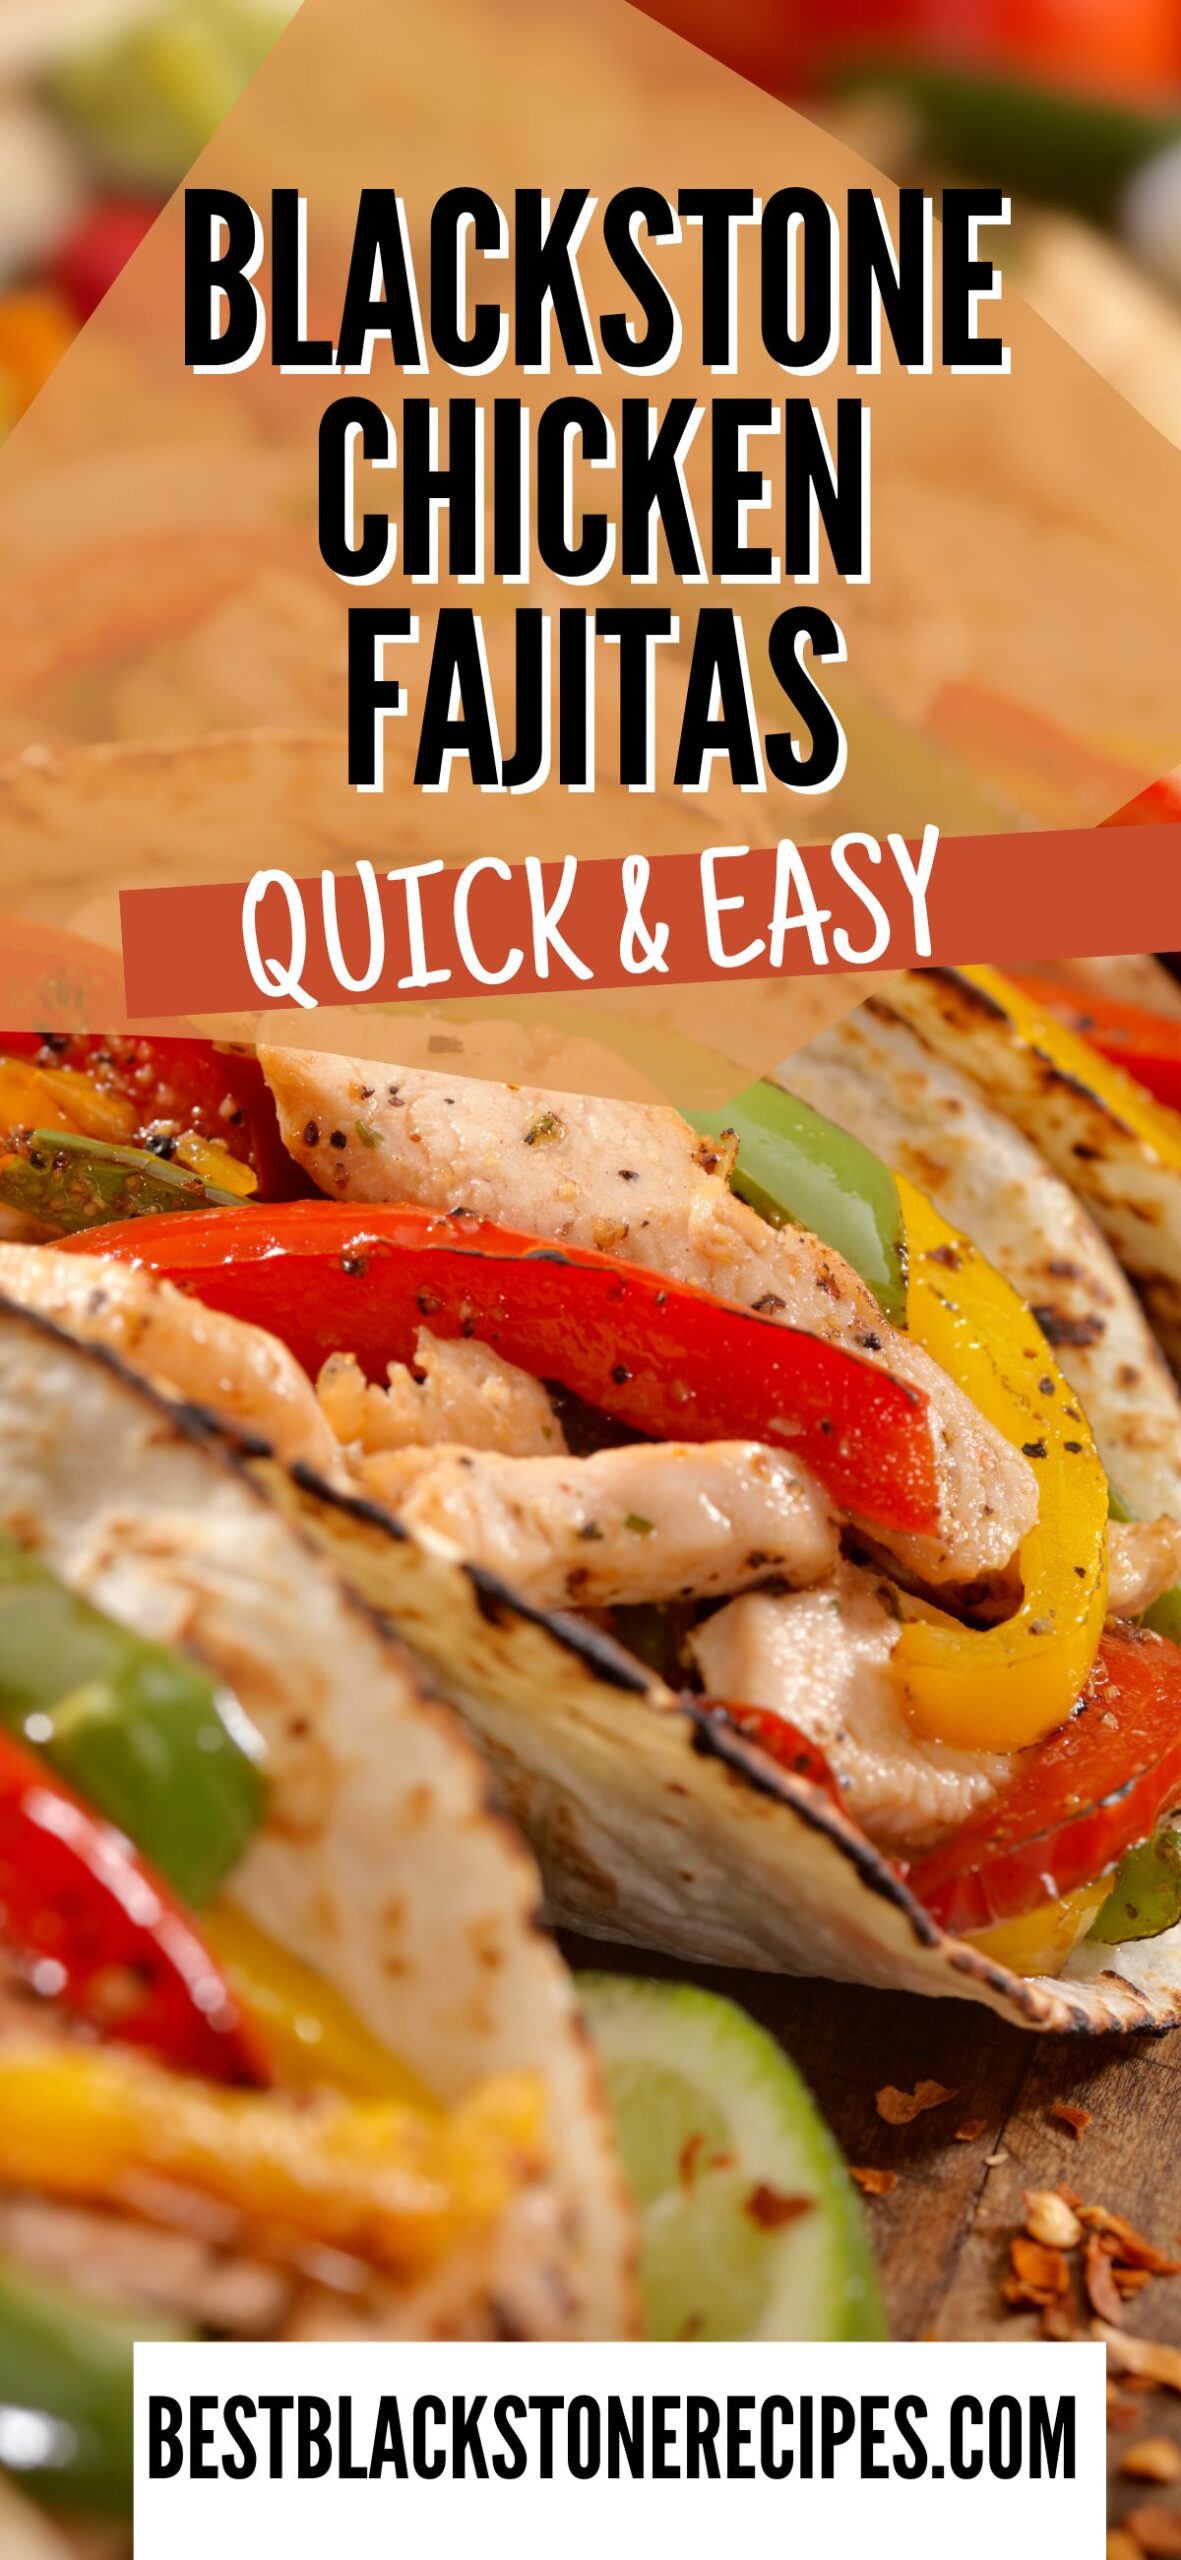 Savory chicken fajitas with colorful bell peppers and seasoning.